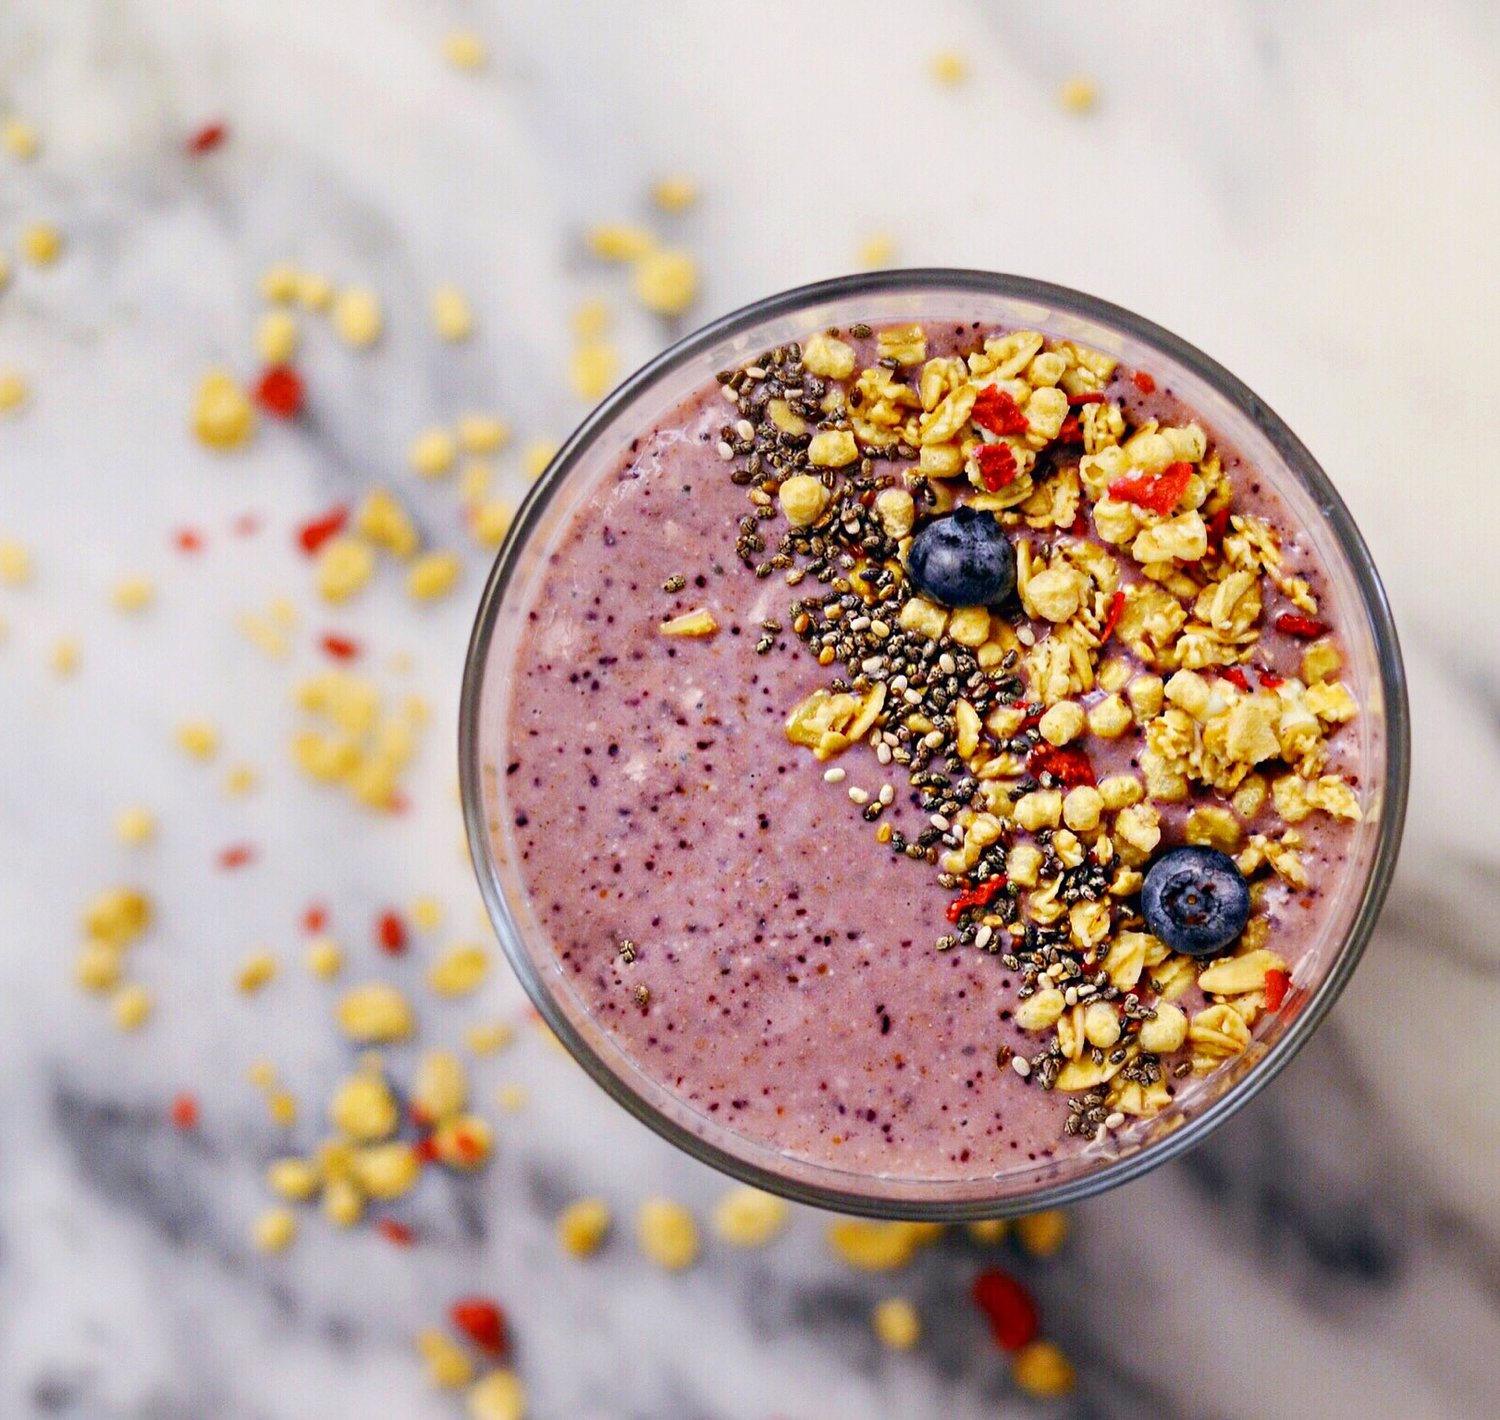 Blueberry and Beat Ginger Smoothie